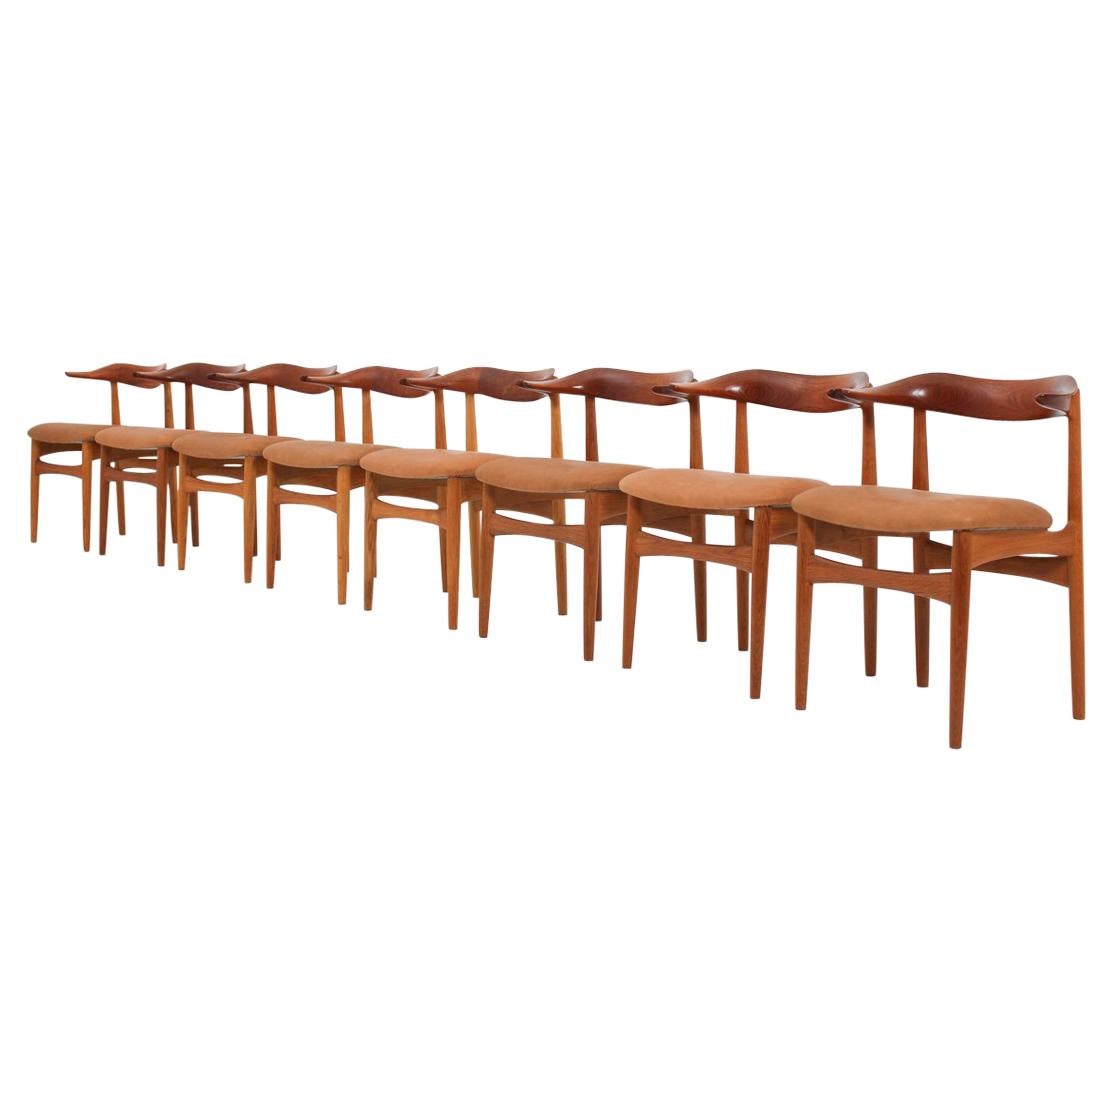 Set of Eight Danish Dining Chairs "Cowhorn Chair" by Knud Faerch